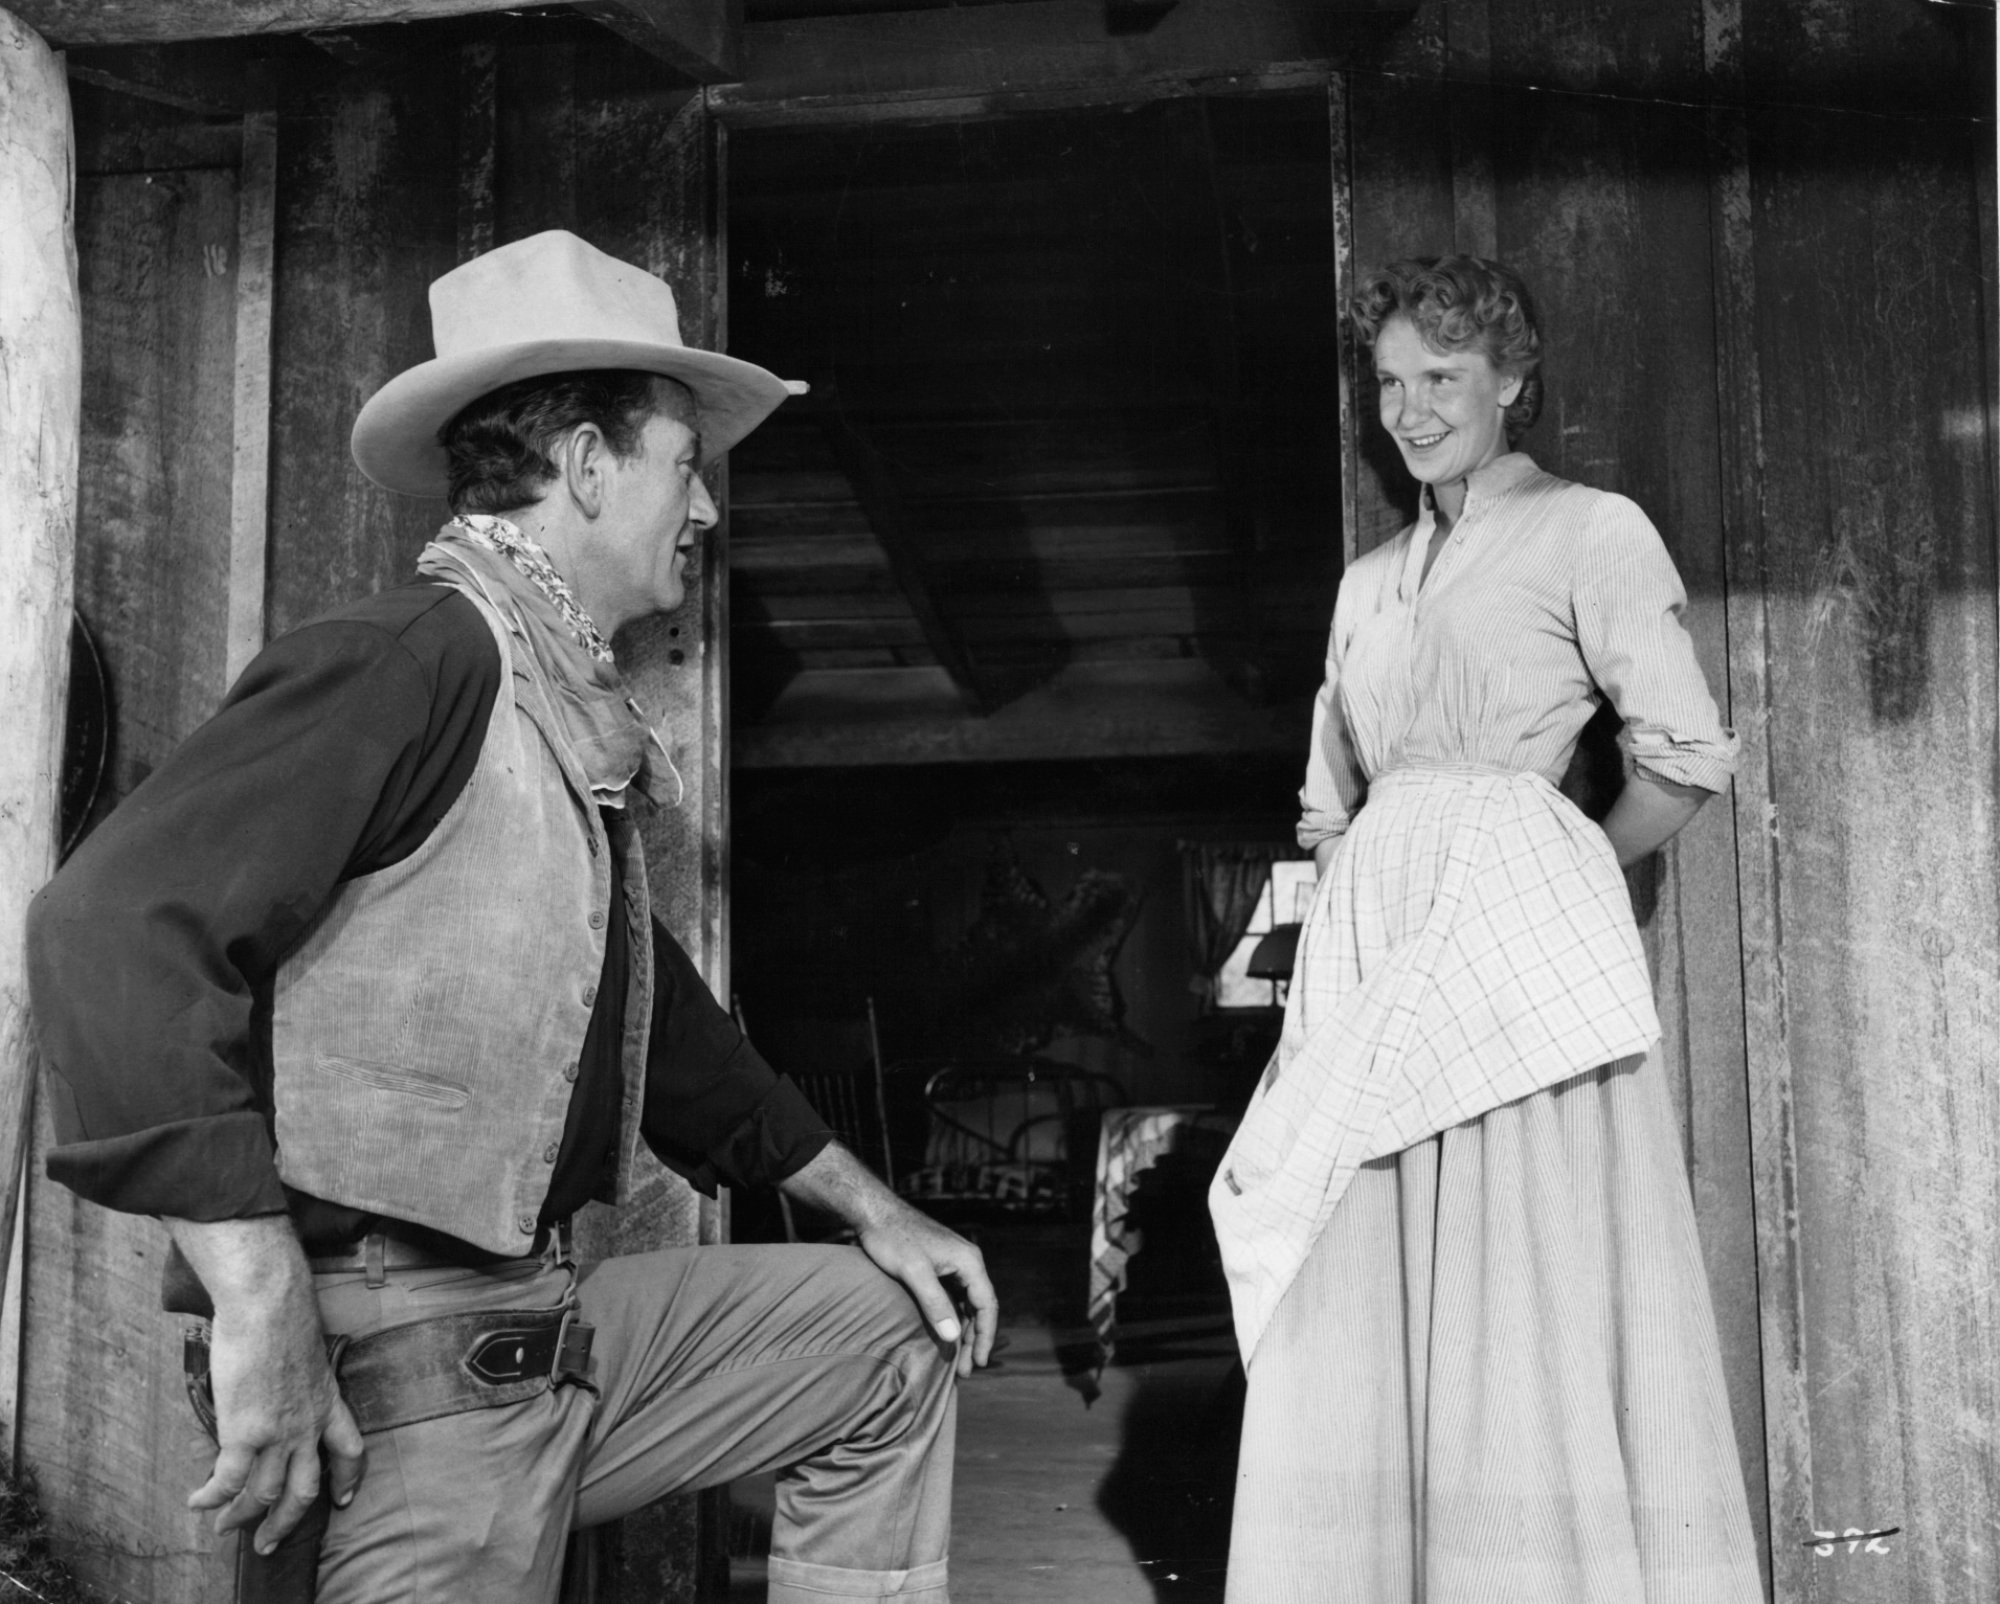 'Hondo' John Wayne as Hondo Lane and Geraldine Page as Angie Lowe. He's resting his leg on an upper stair, wearing a cowboy uniform looking at Page. She's smiling with her hands behind her back wearing an old-fashioned dress and apron.